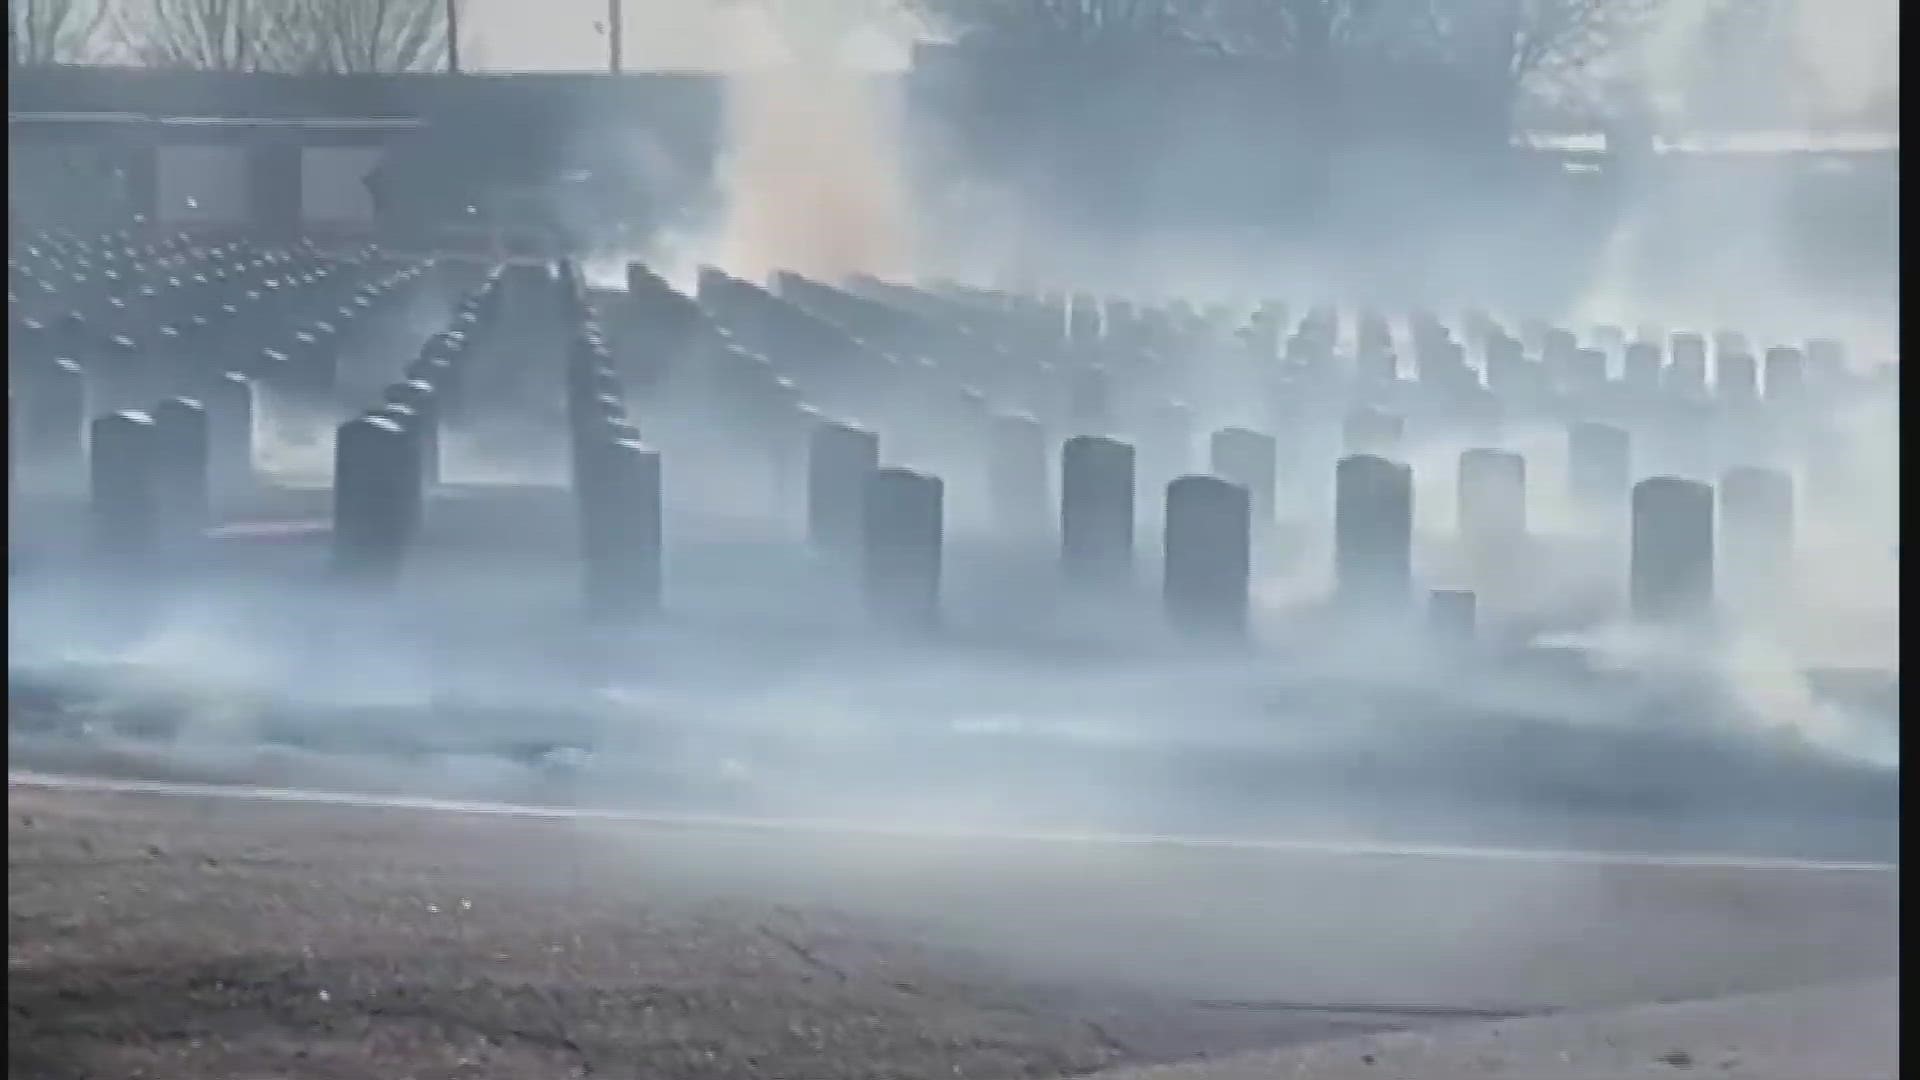 Video from 5NEWS viewer Kris Keyton shows a fire at the Fort Smith National Cemetery.